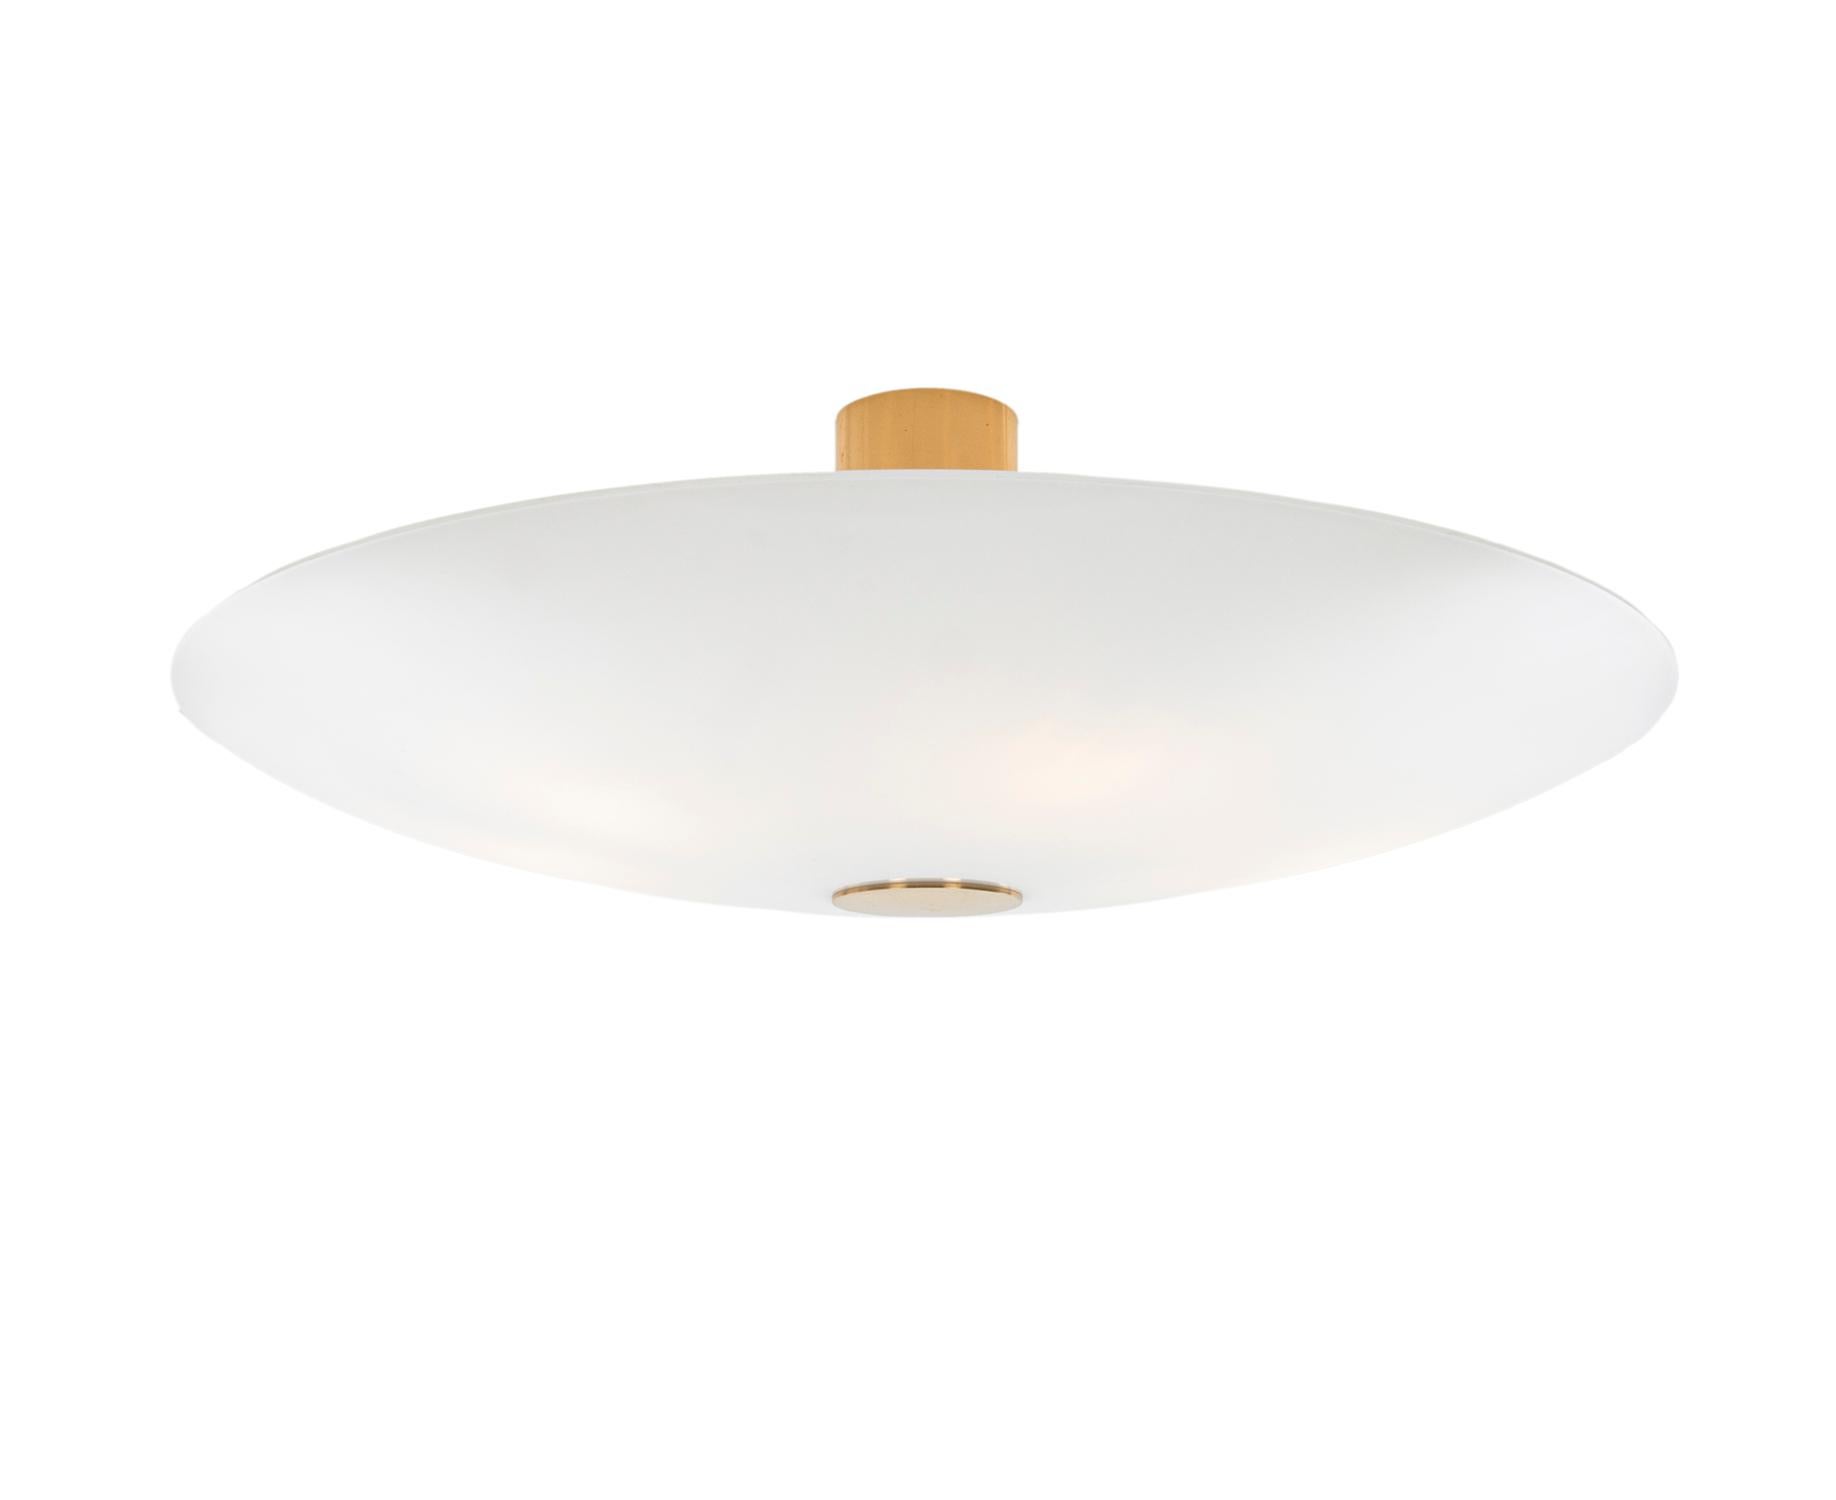 Elegant white opal glass and brass wall or ceiling flush mount light by Florian Schulz / Licht und Objekt made in Germany in the 1960s.

The lamp is well-constructed and of extremely high quality (made in Germany) and, despite series production, a